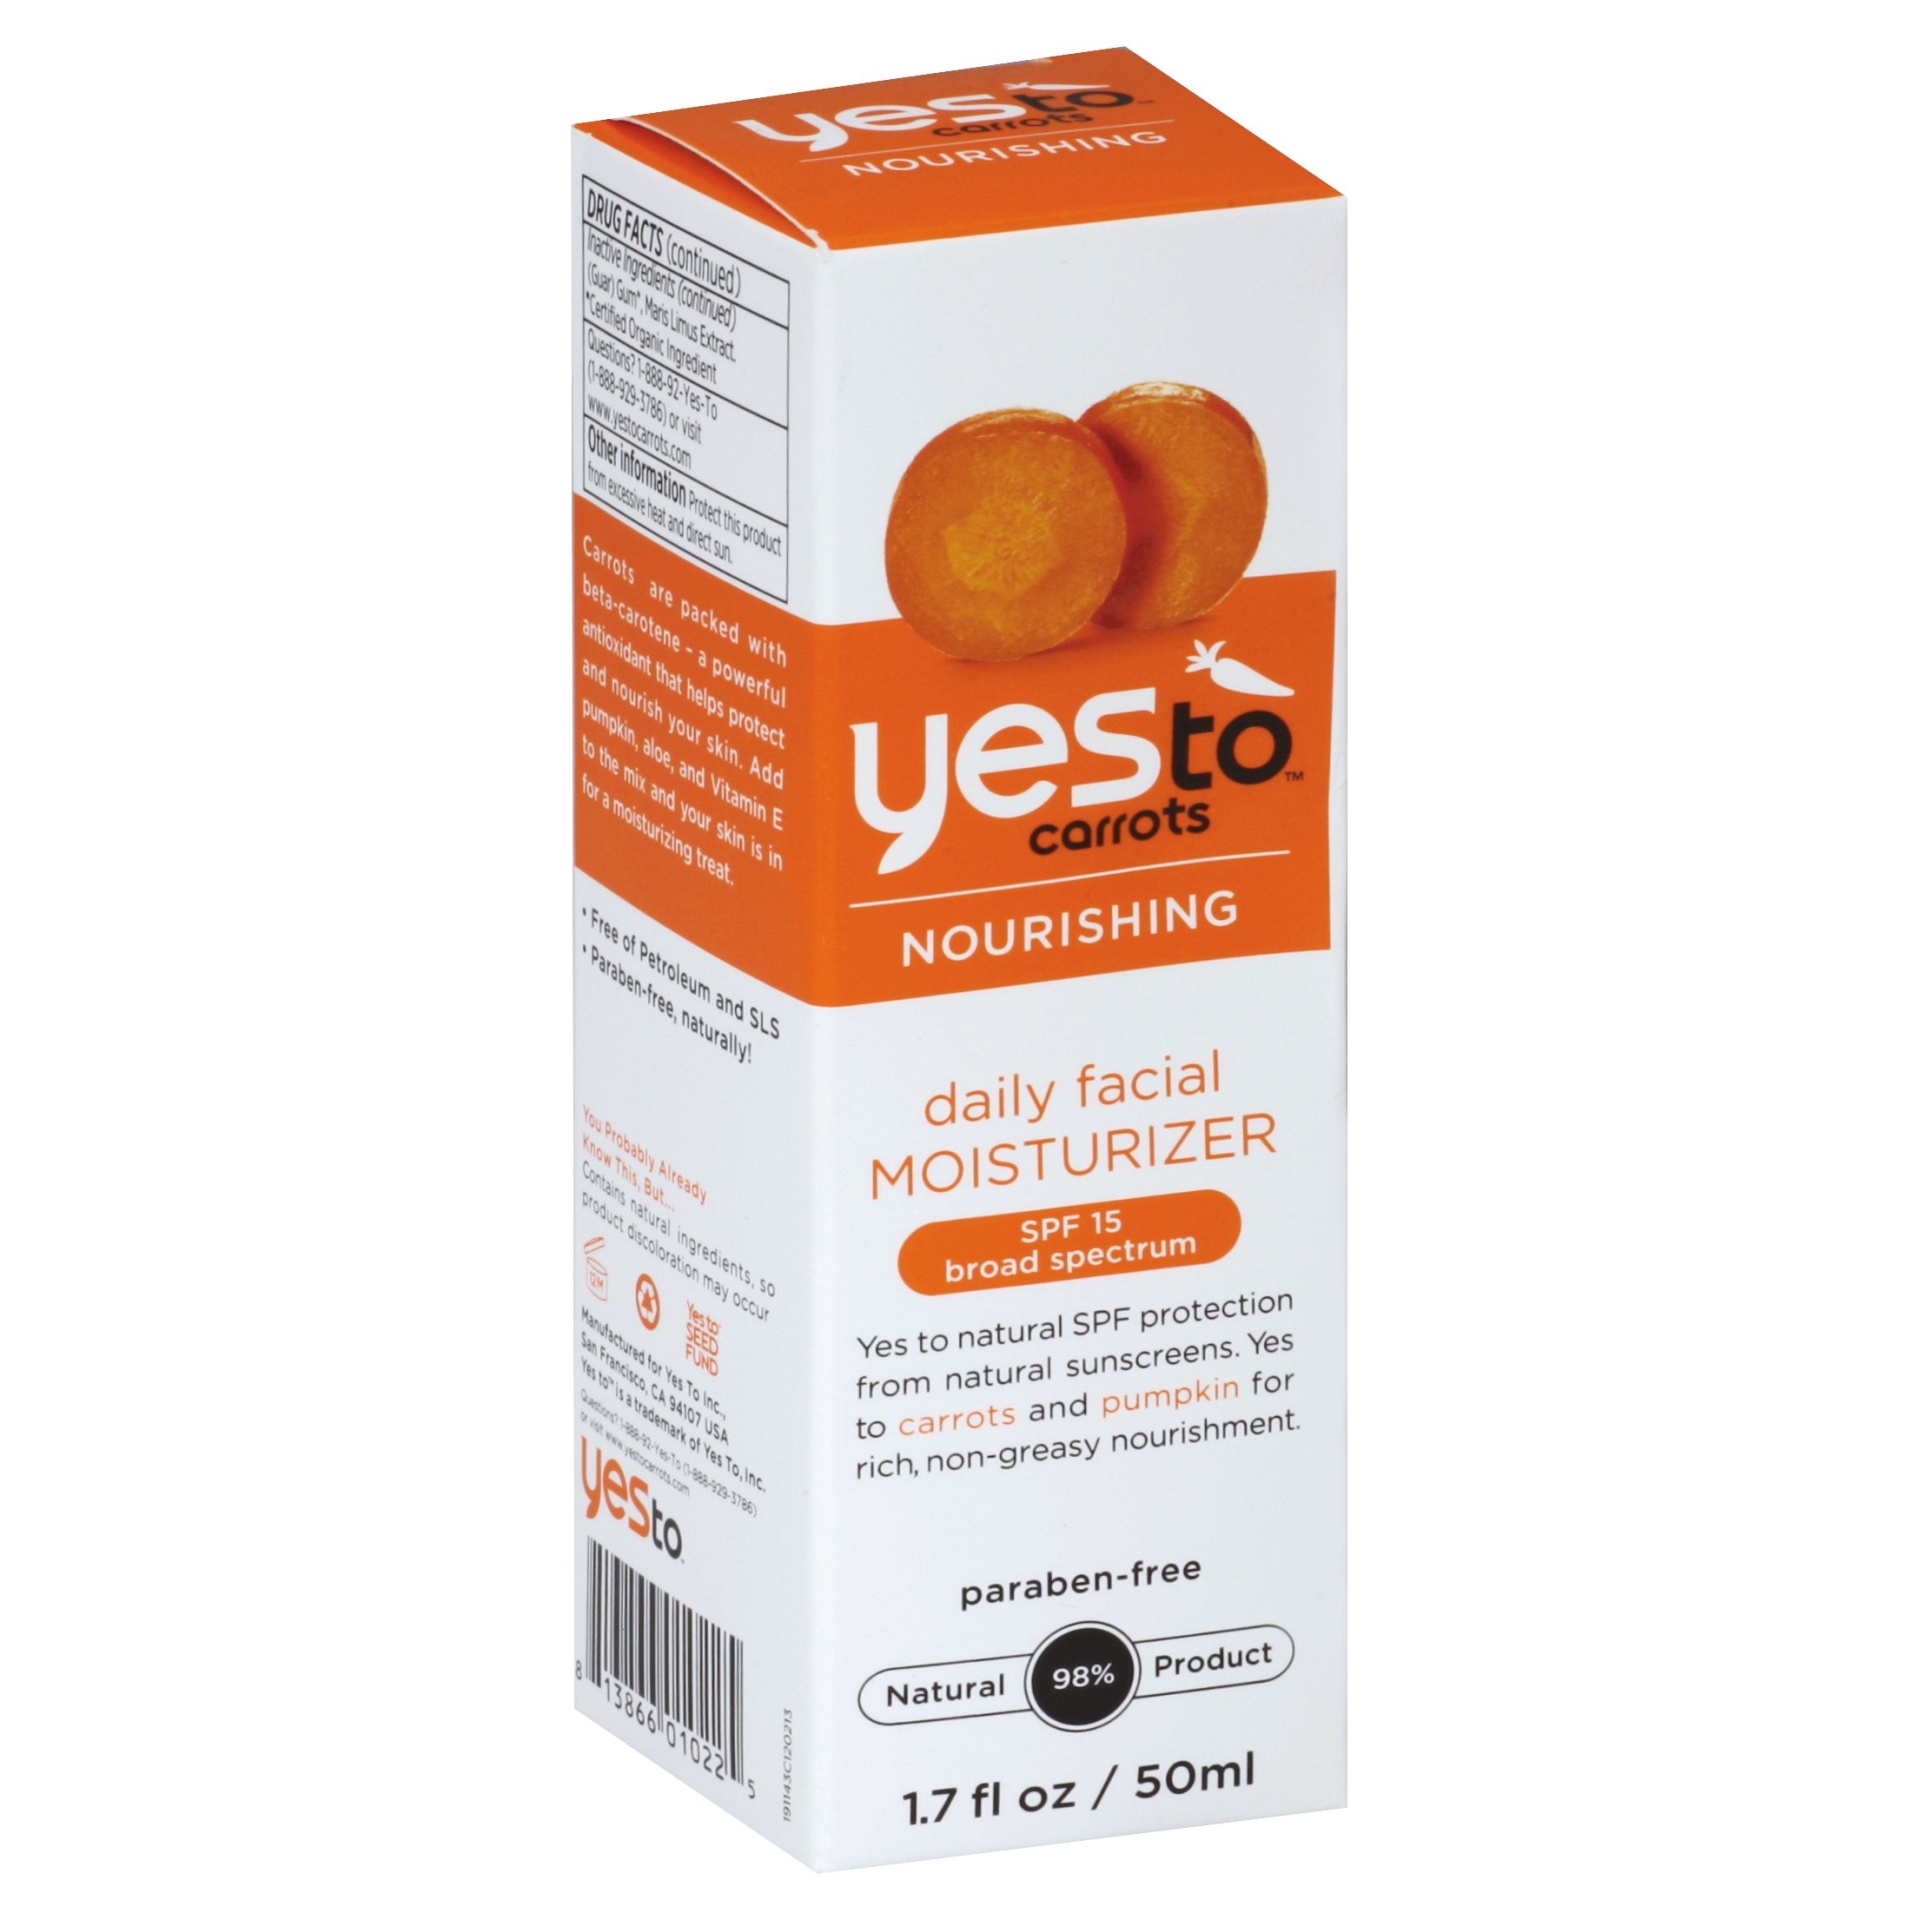 slide 1 of 4, Yes To, Inc. Moisturizer, Daily Facial, Nourishing, Broad Spectrum Spf 15, 1.7 oz